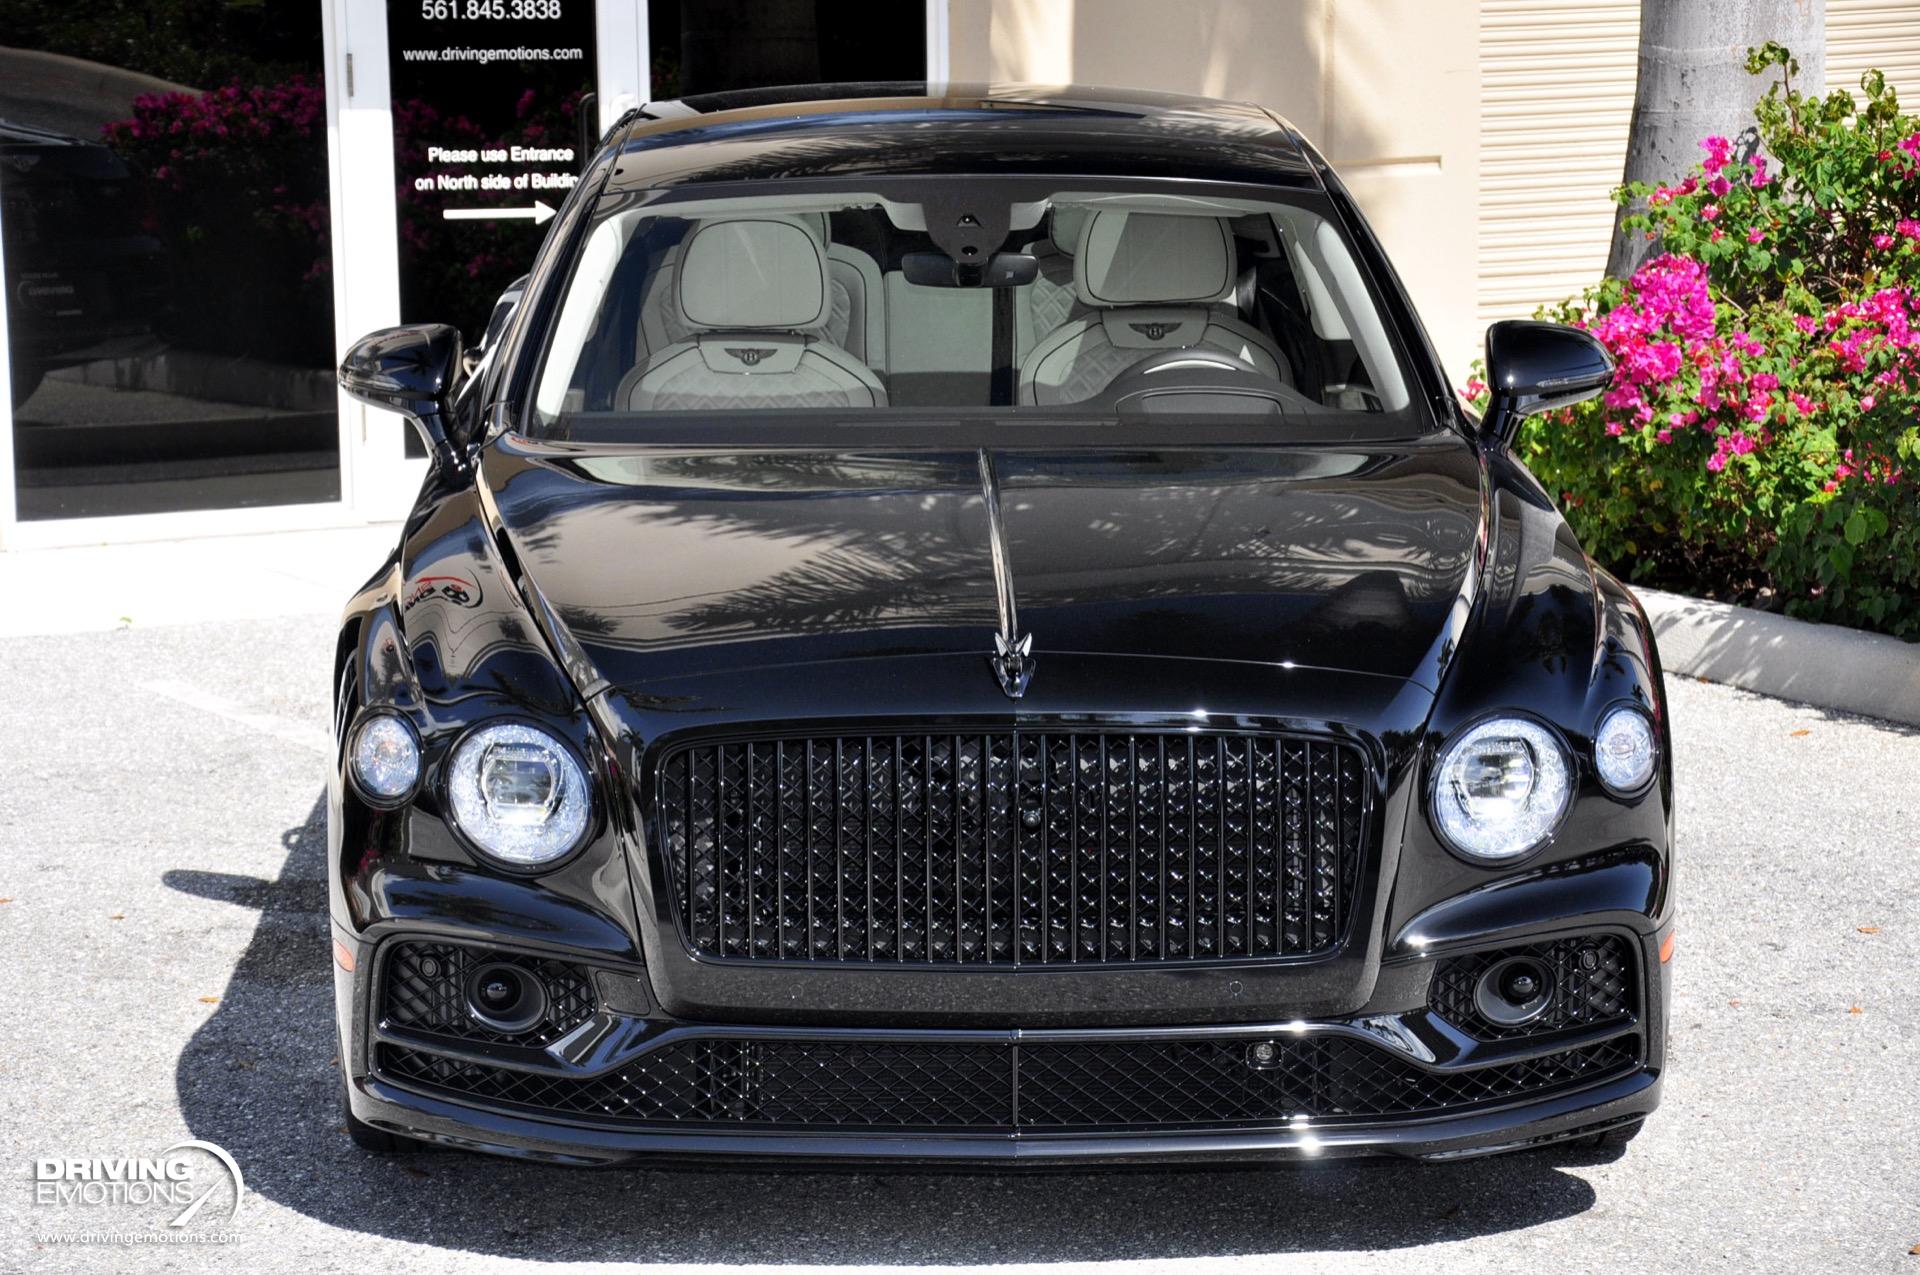 Used 2021 Bentley Flying Spur W12 First Edition NAIM AUDIO! LOW MILES! $296K MSRP!! | Lake Park, FL